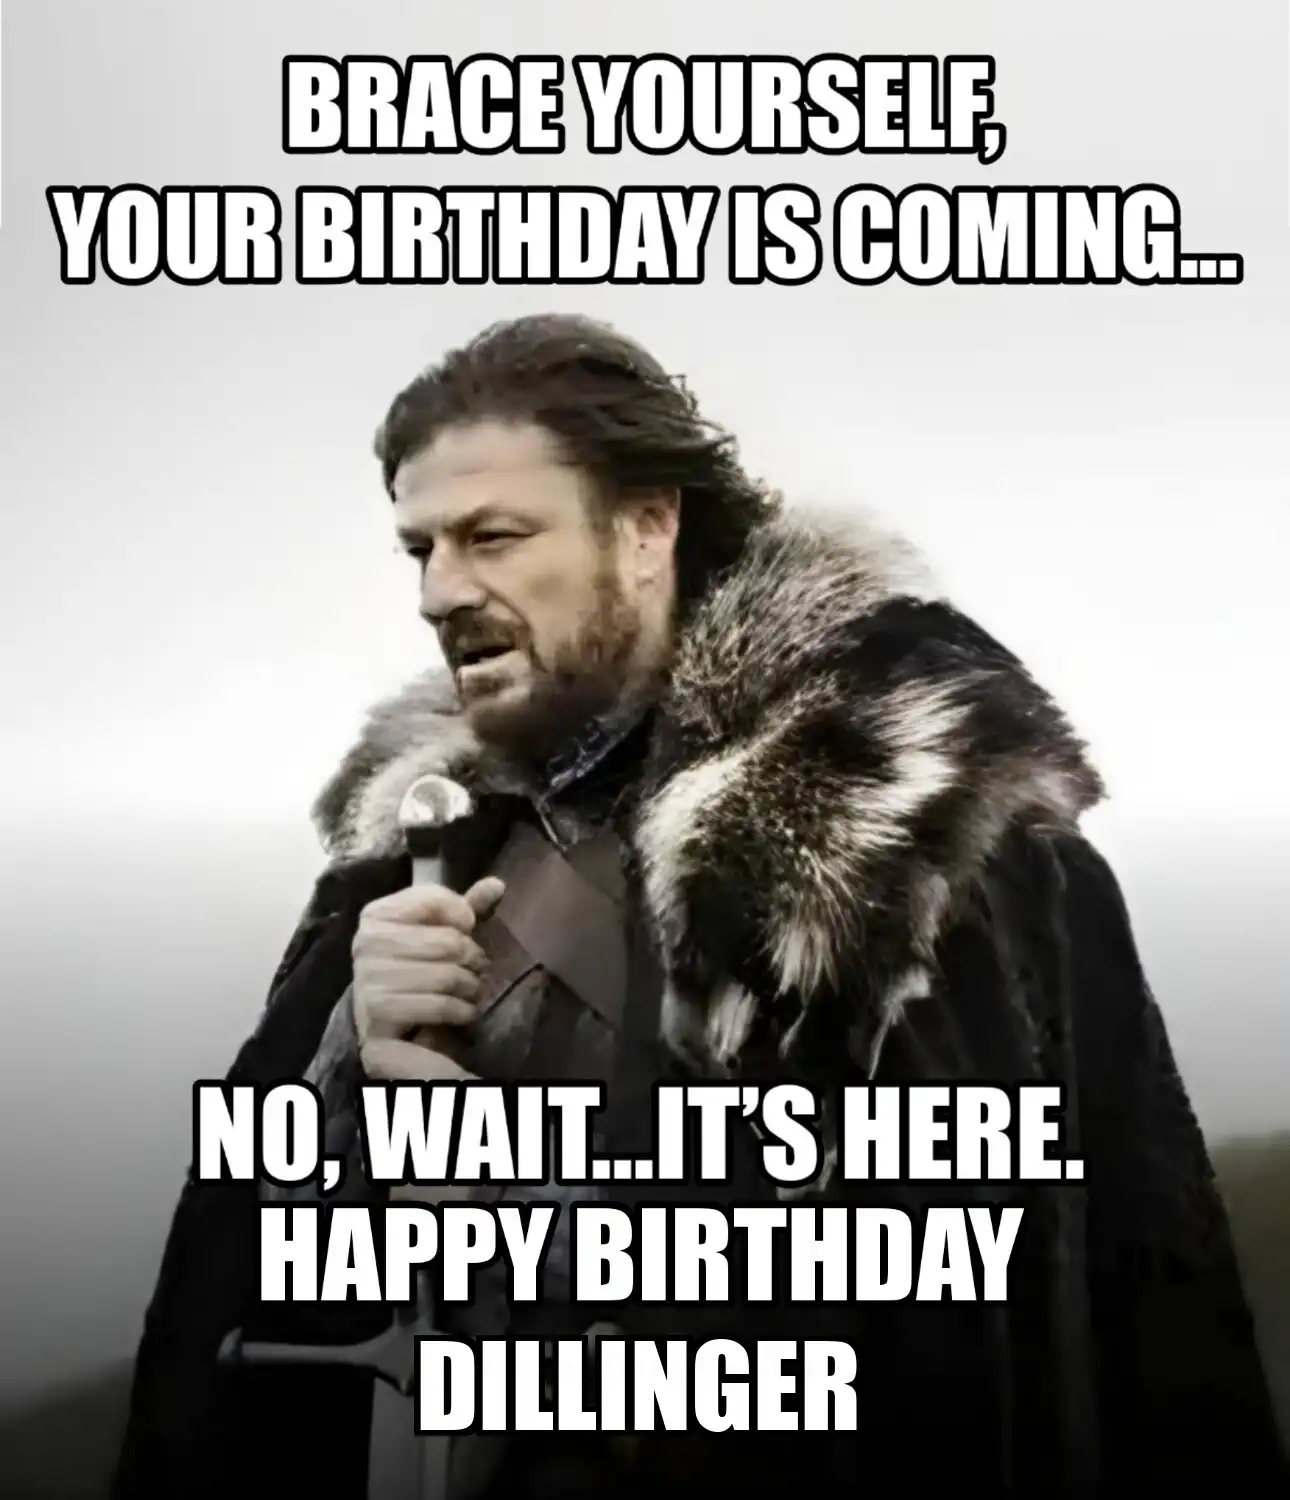 Happy Birthday Dillinger Brace Yourself Your Birthday Is Coming Meme